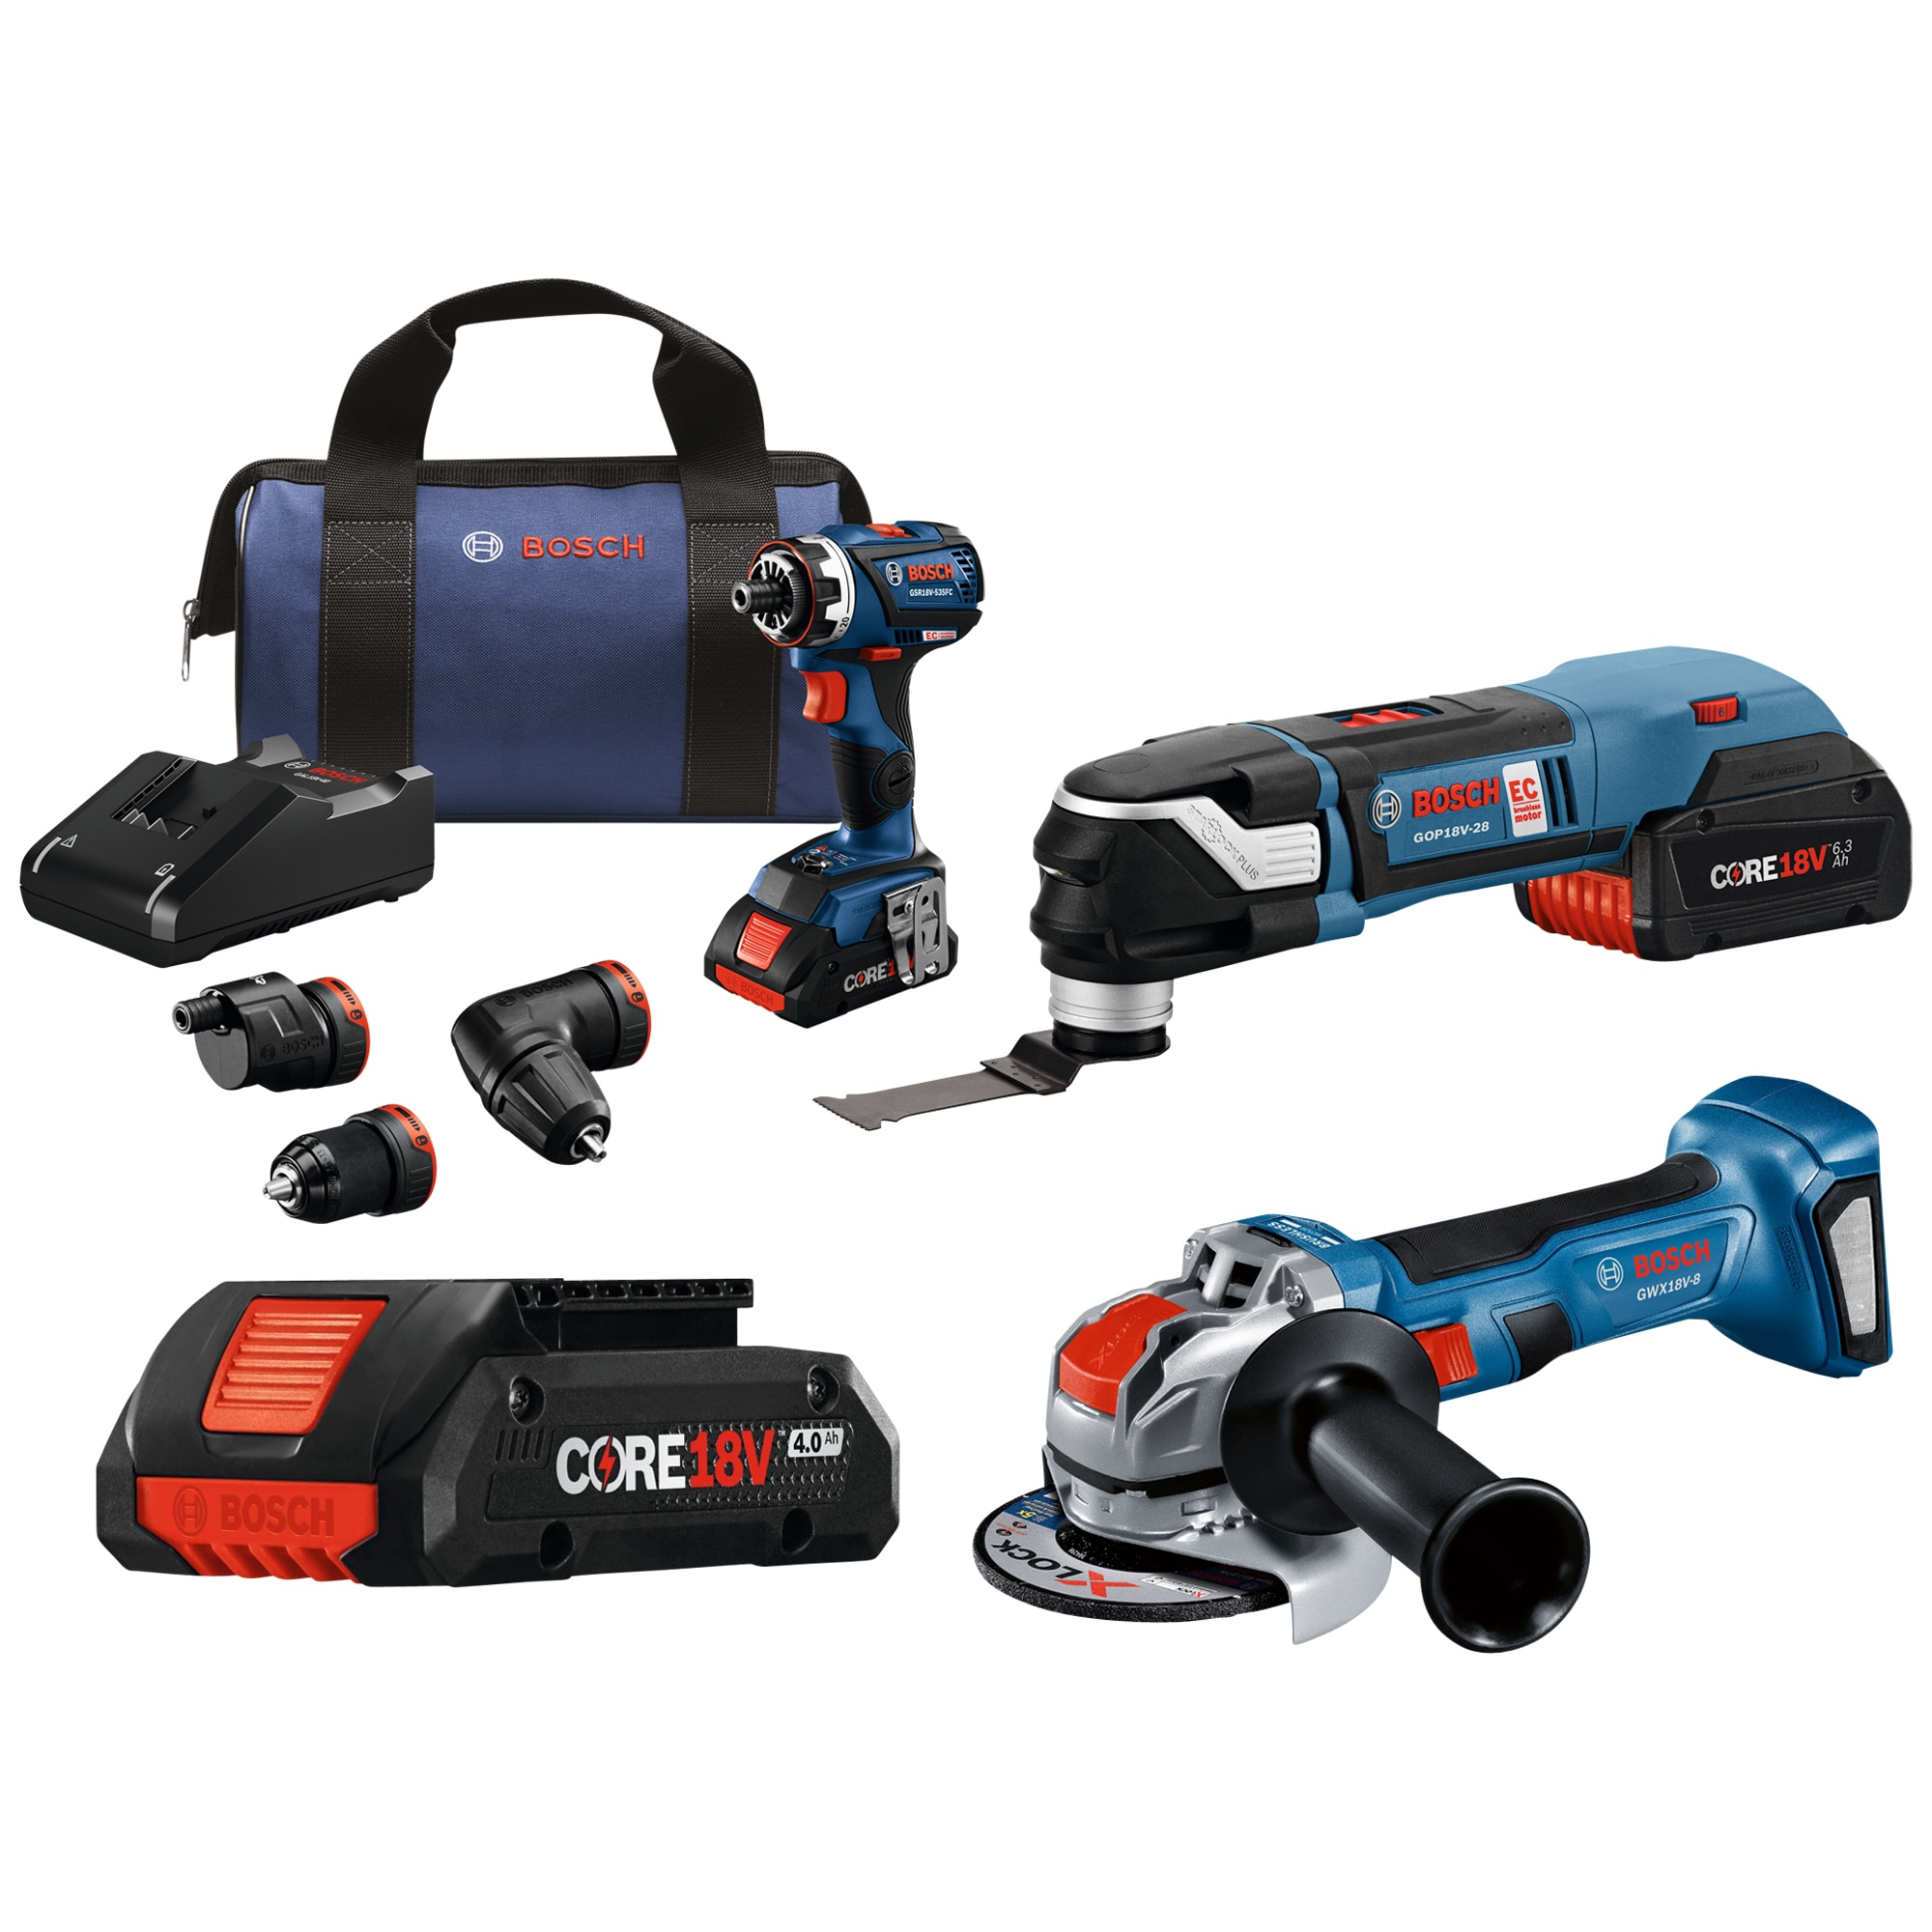 Bosch StarlockPlus Oscillating Oscillating department Multi-Tool at 18-volt in the Tool Cordless Speed Kits Variable Brushless